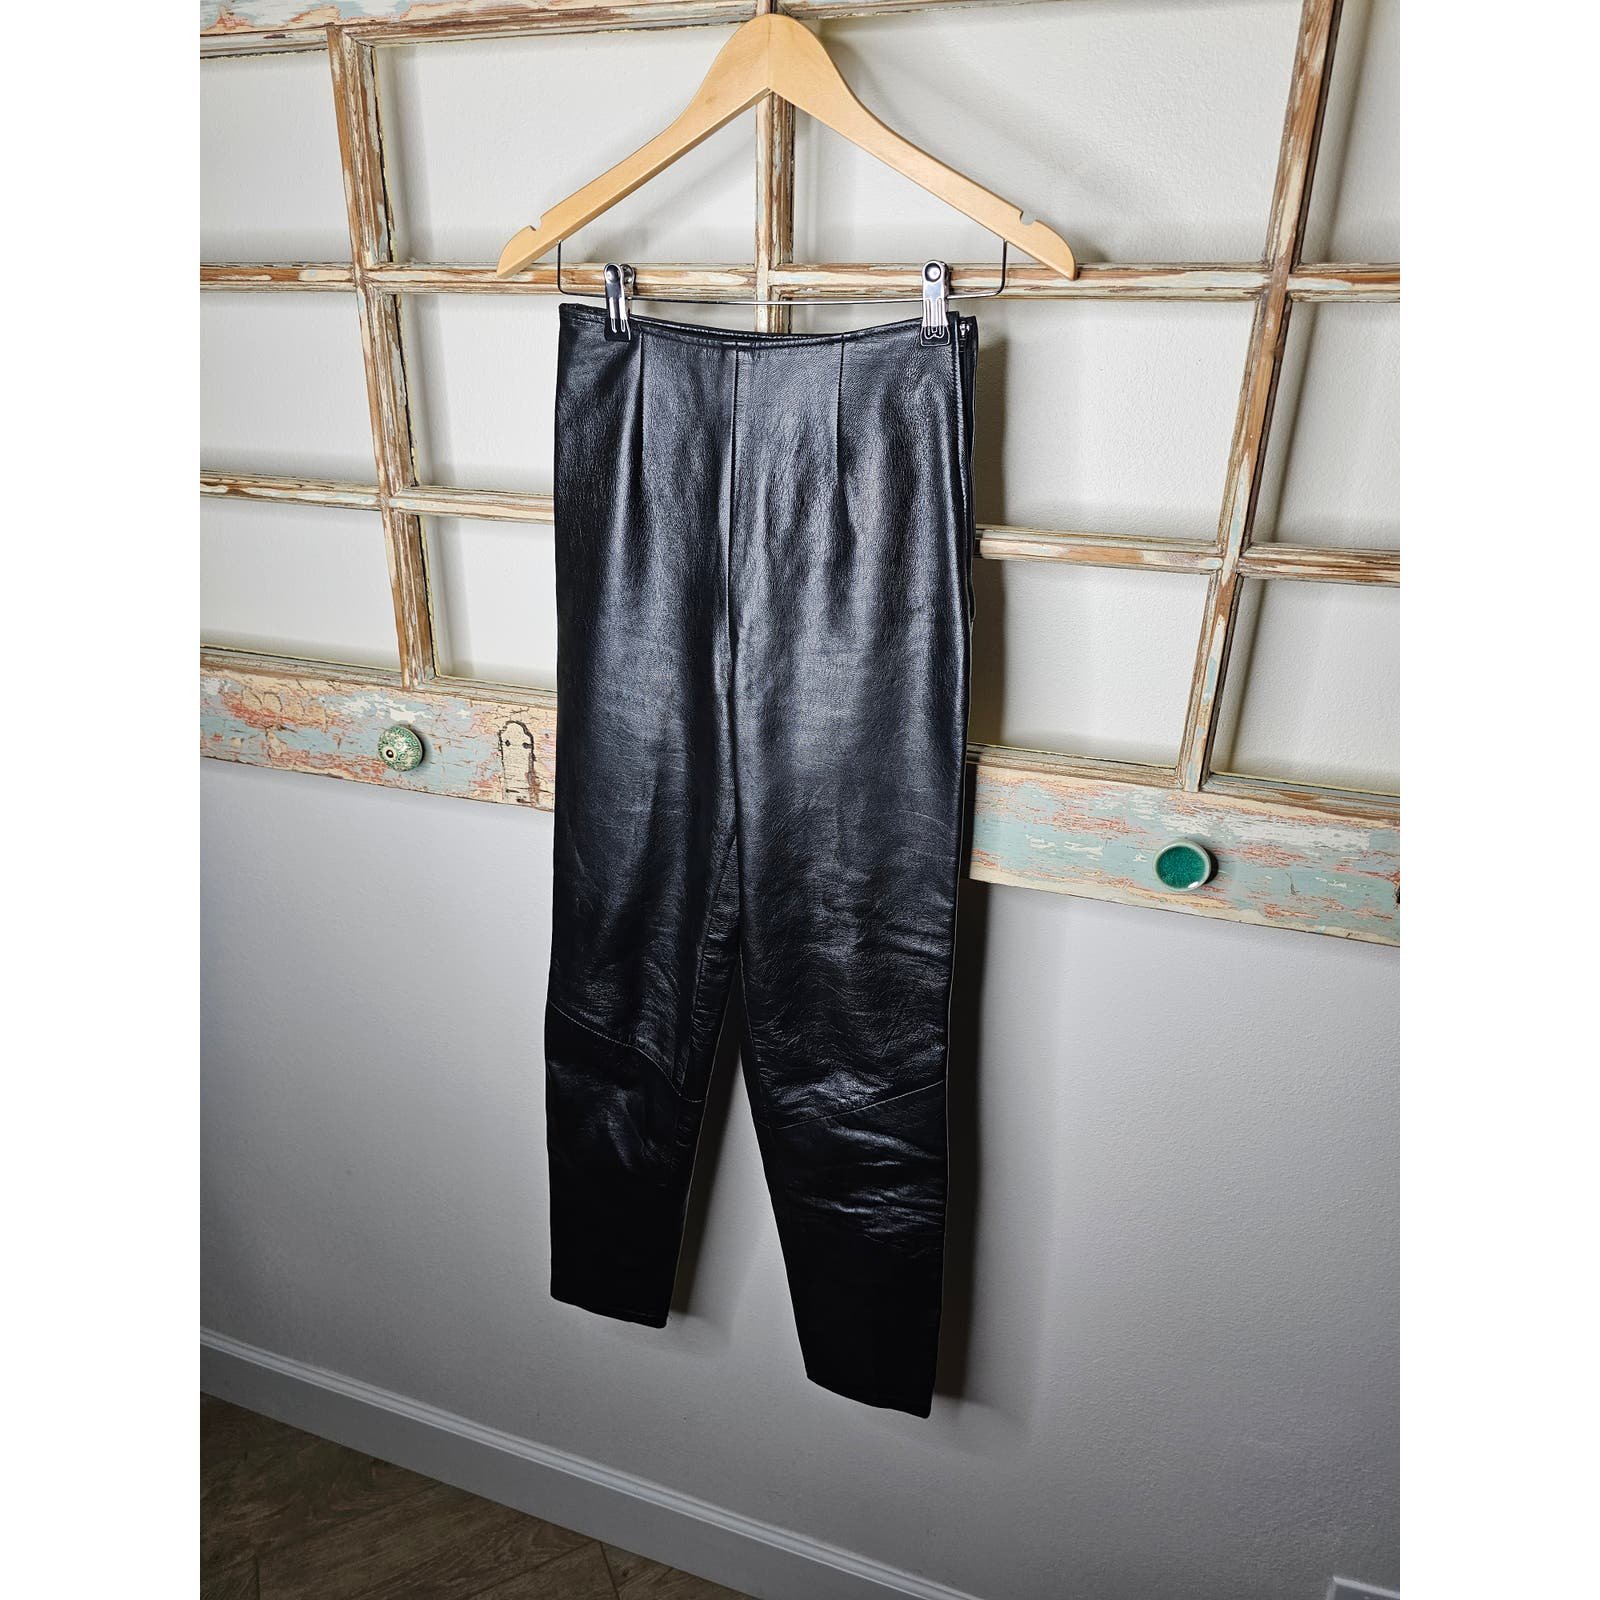 Wholesale price Leather Carina Pelle lined Black Pants Ladies size 4 HYw6980V2 New Style